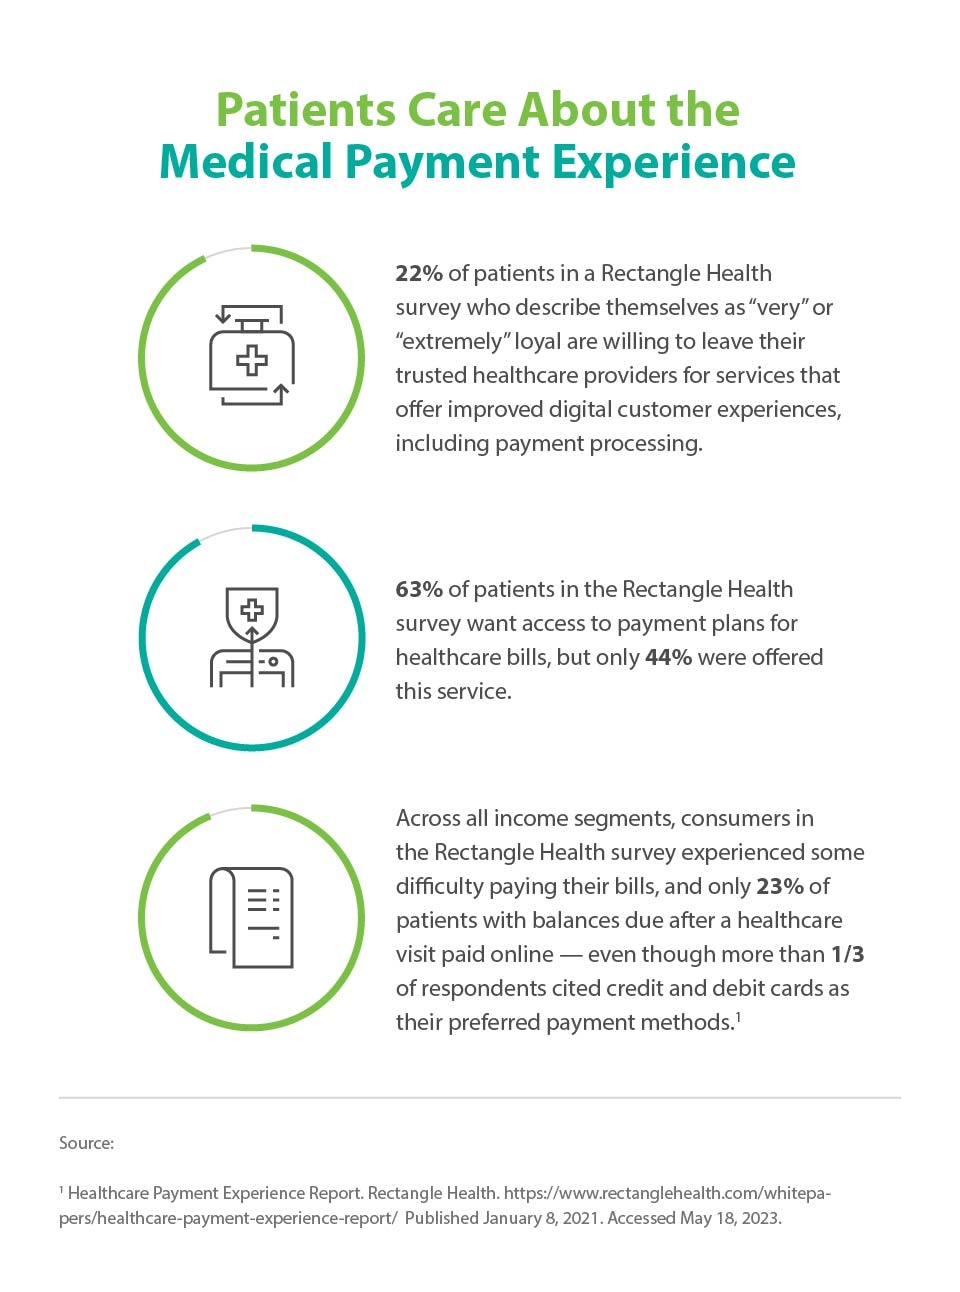 Patients Care About the Medical Payment Experience